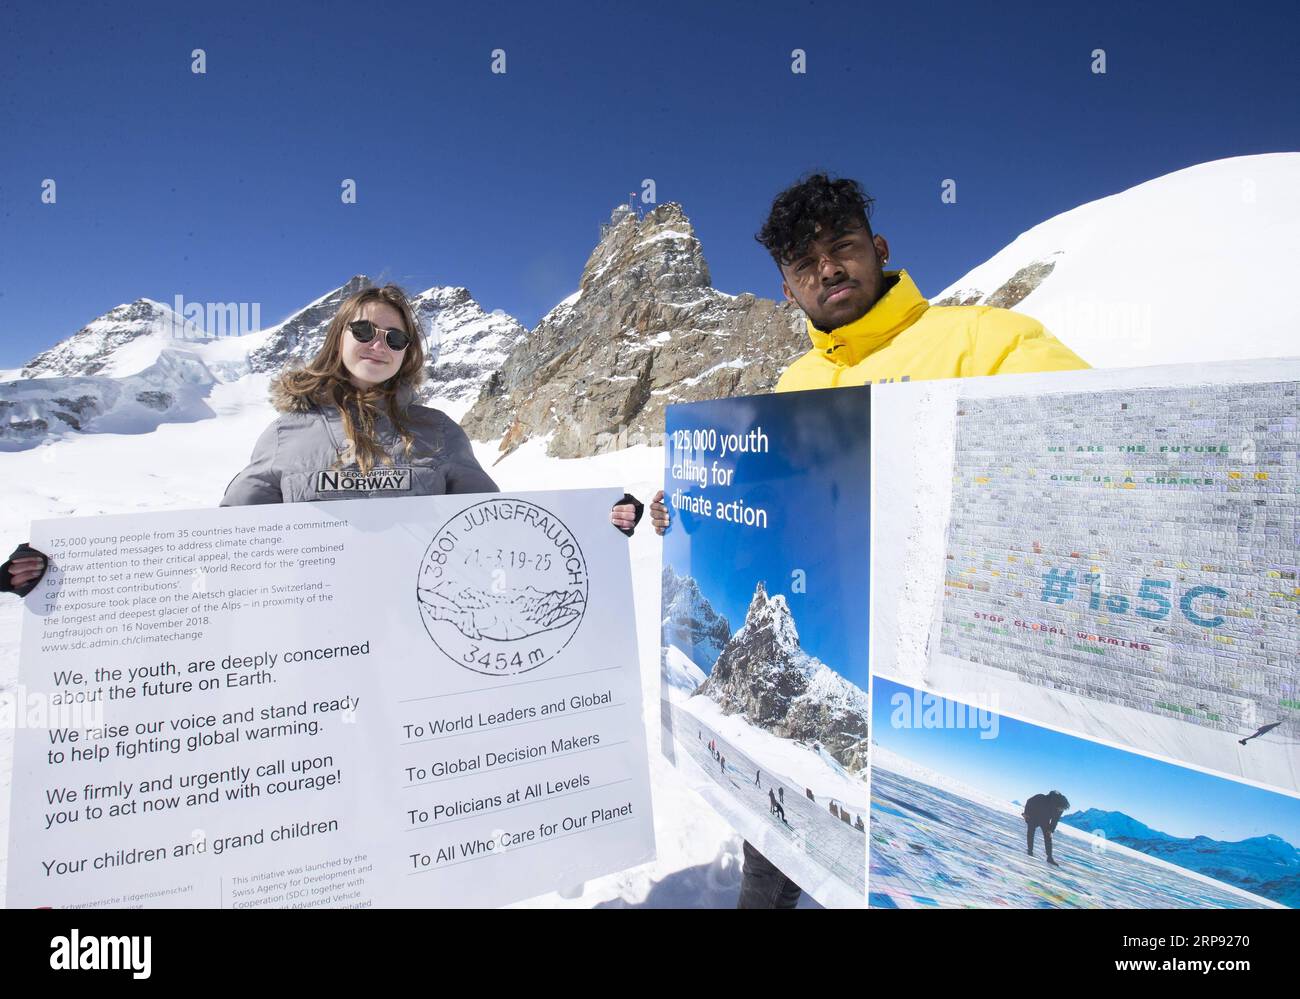 (190321) -- JUNGFRAUJOCH, March 21, 2019 (Xinhua) -- Swiss teenagers Sarangan Sivarajalingam (R) and Selma Schellenberg show copies of a postcard calling for action against climate change on the Aletsch glacier under Jungfraujoch in Switzerland, on March 20, 2019. Some 900 postcards from youths all over the world were stamped and sent on Wednesday from Europe s highest postbox on the Jungfraujoch peak, Switzerland, to global leaders, calling for action against climate change. (Xinhua/Xu Jinquan) SWITZERLAND-JUNGFRAUJOCH-CLIMATE CHANGE-POSTCARDS PUBLICATIONxNOTxINxCHN Stock Photo